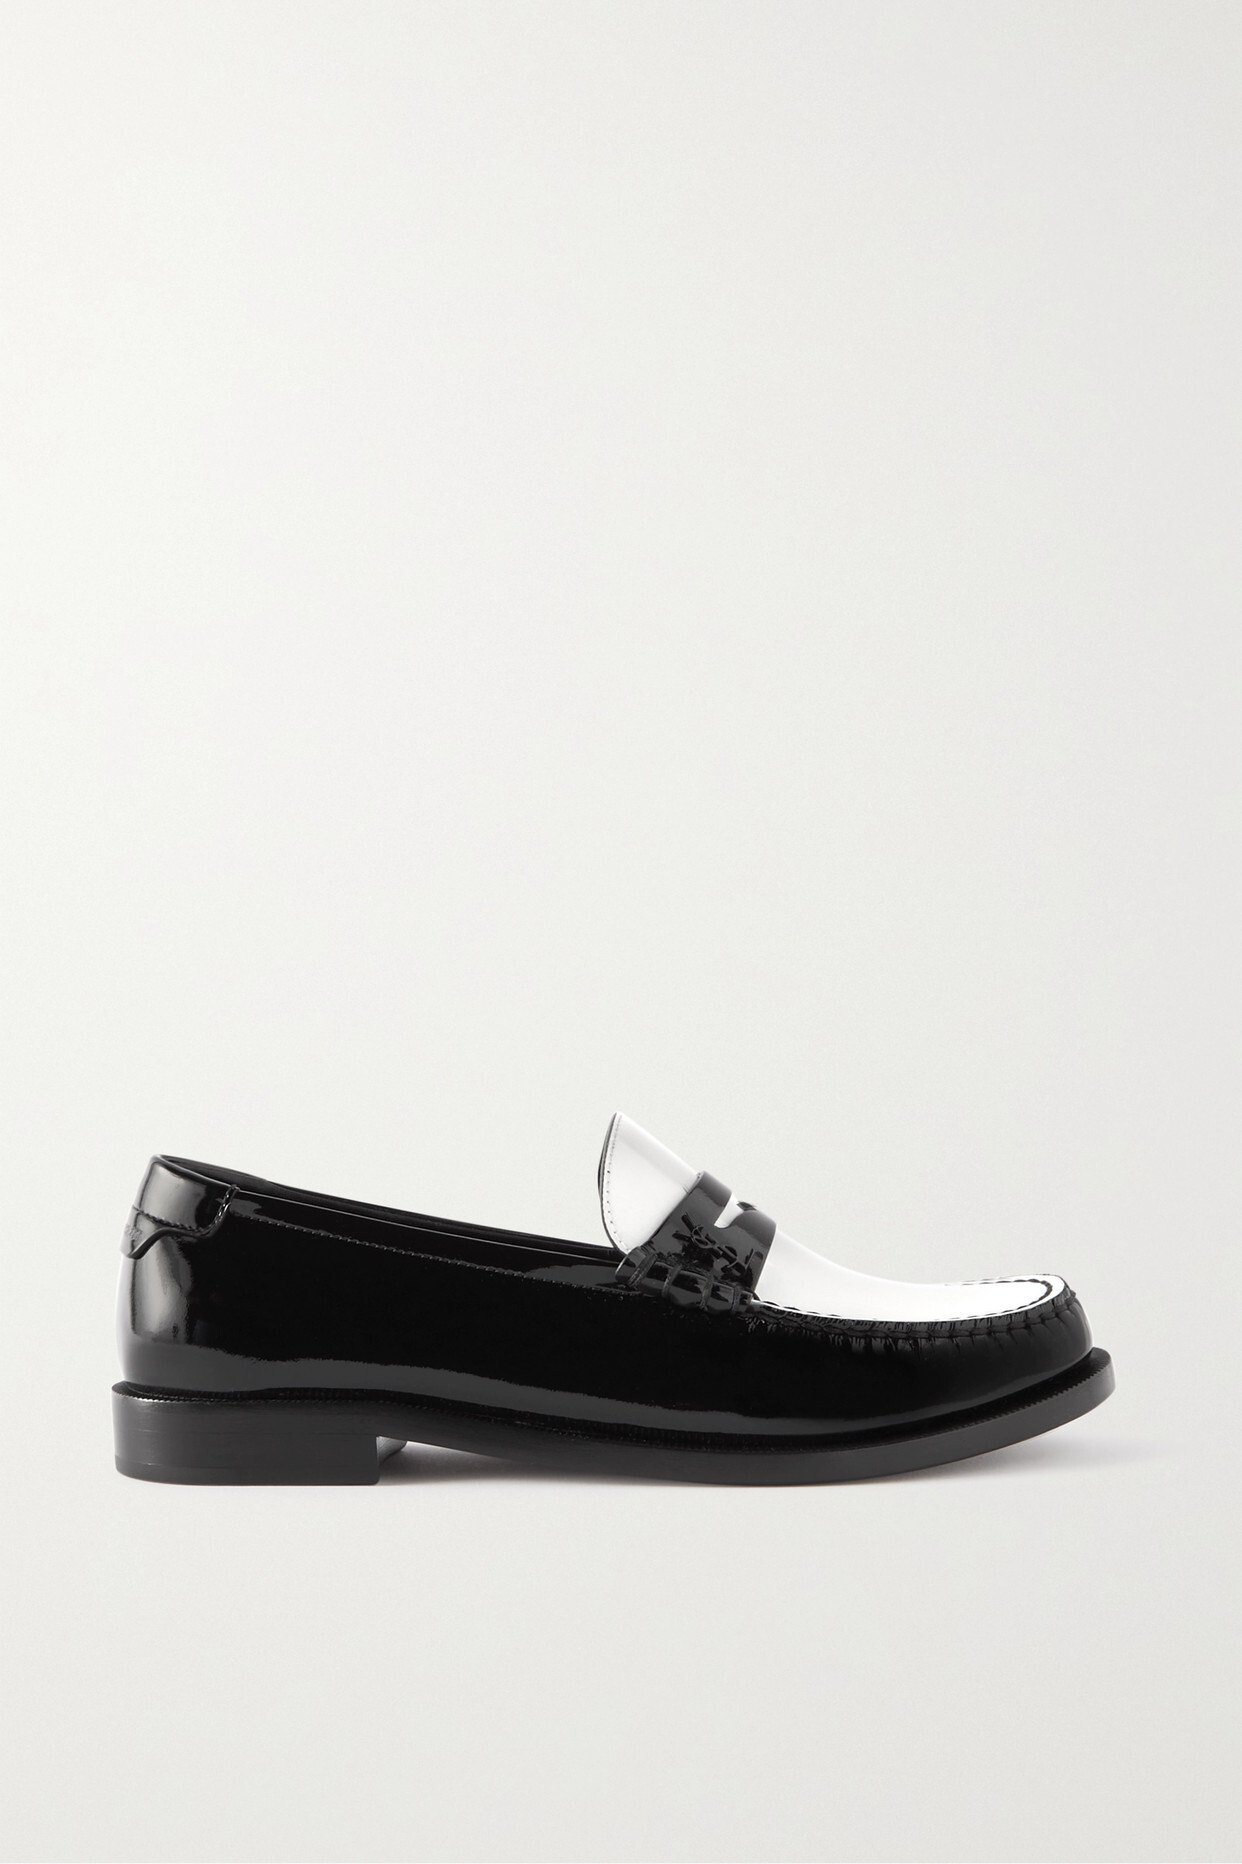 SAINT LAURENT - Two-tone Patent-leather Loafers - Black